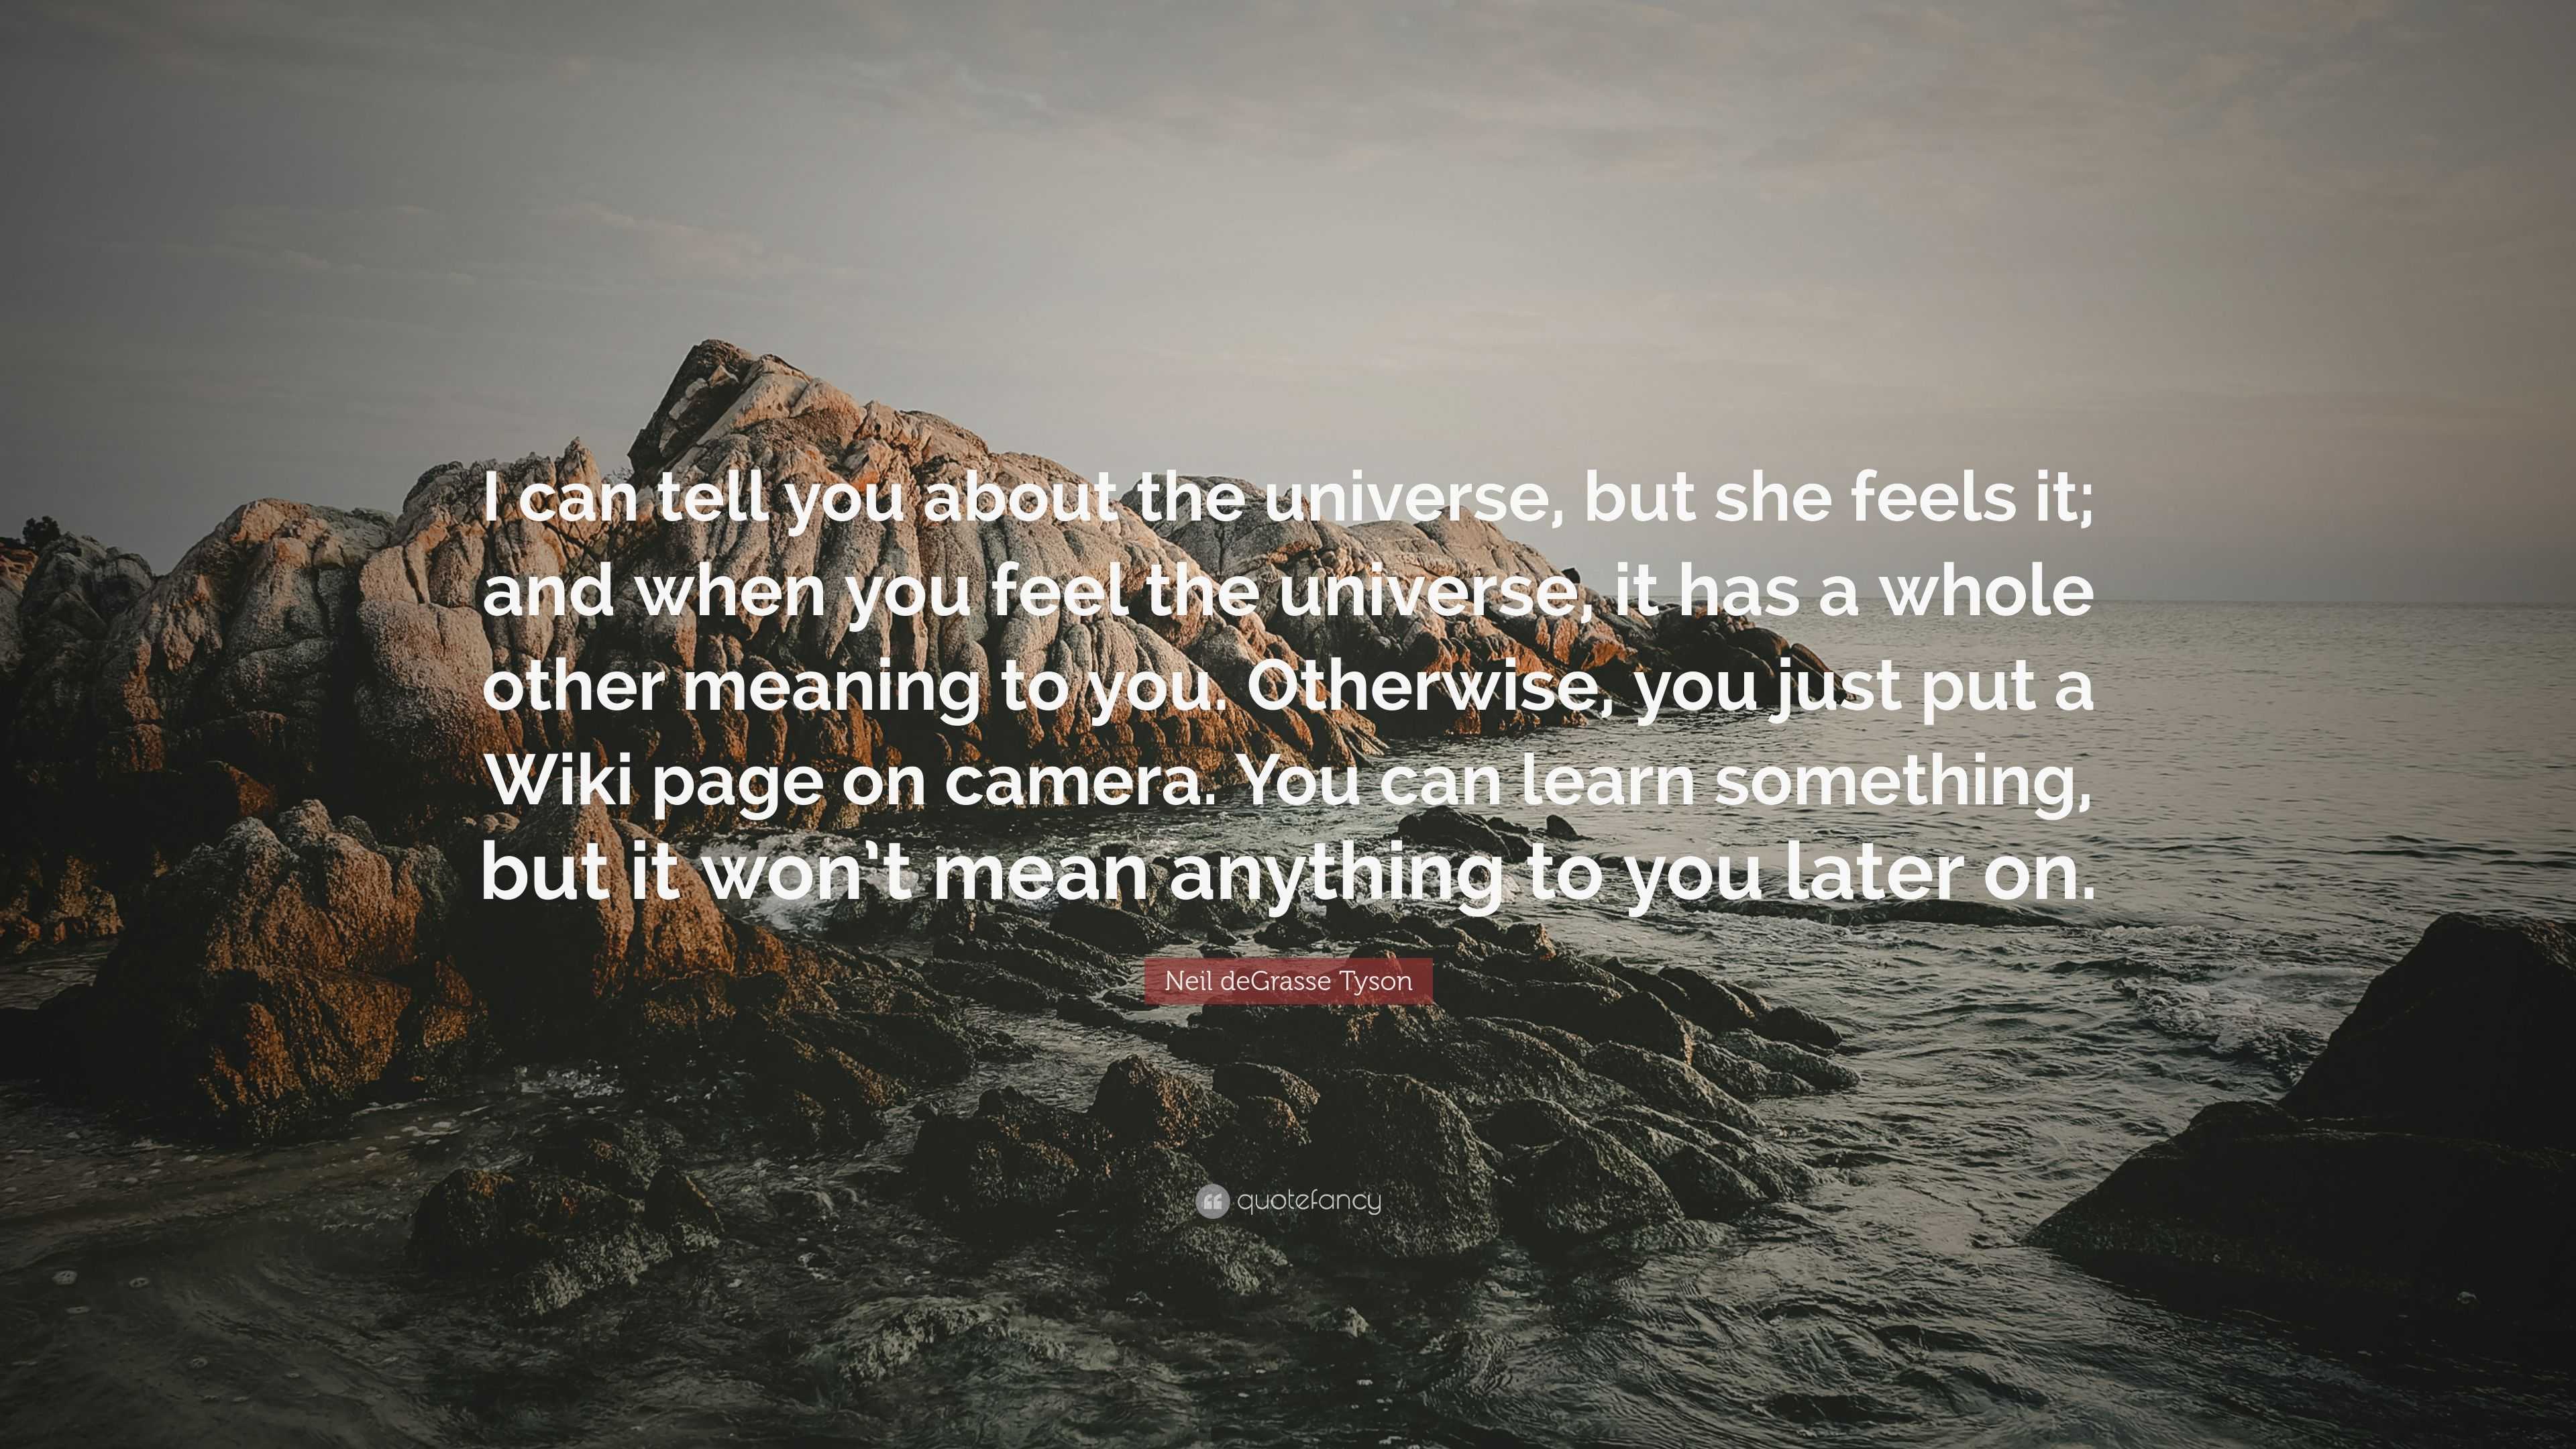 Neil deGrasse Tyson Quote: “I can tell you about the universe, but she ...